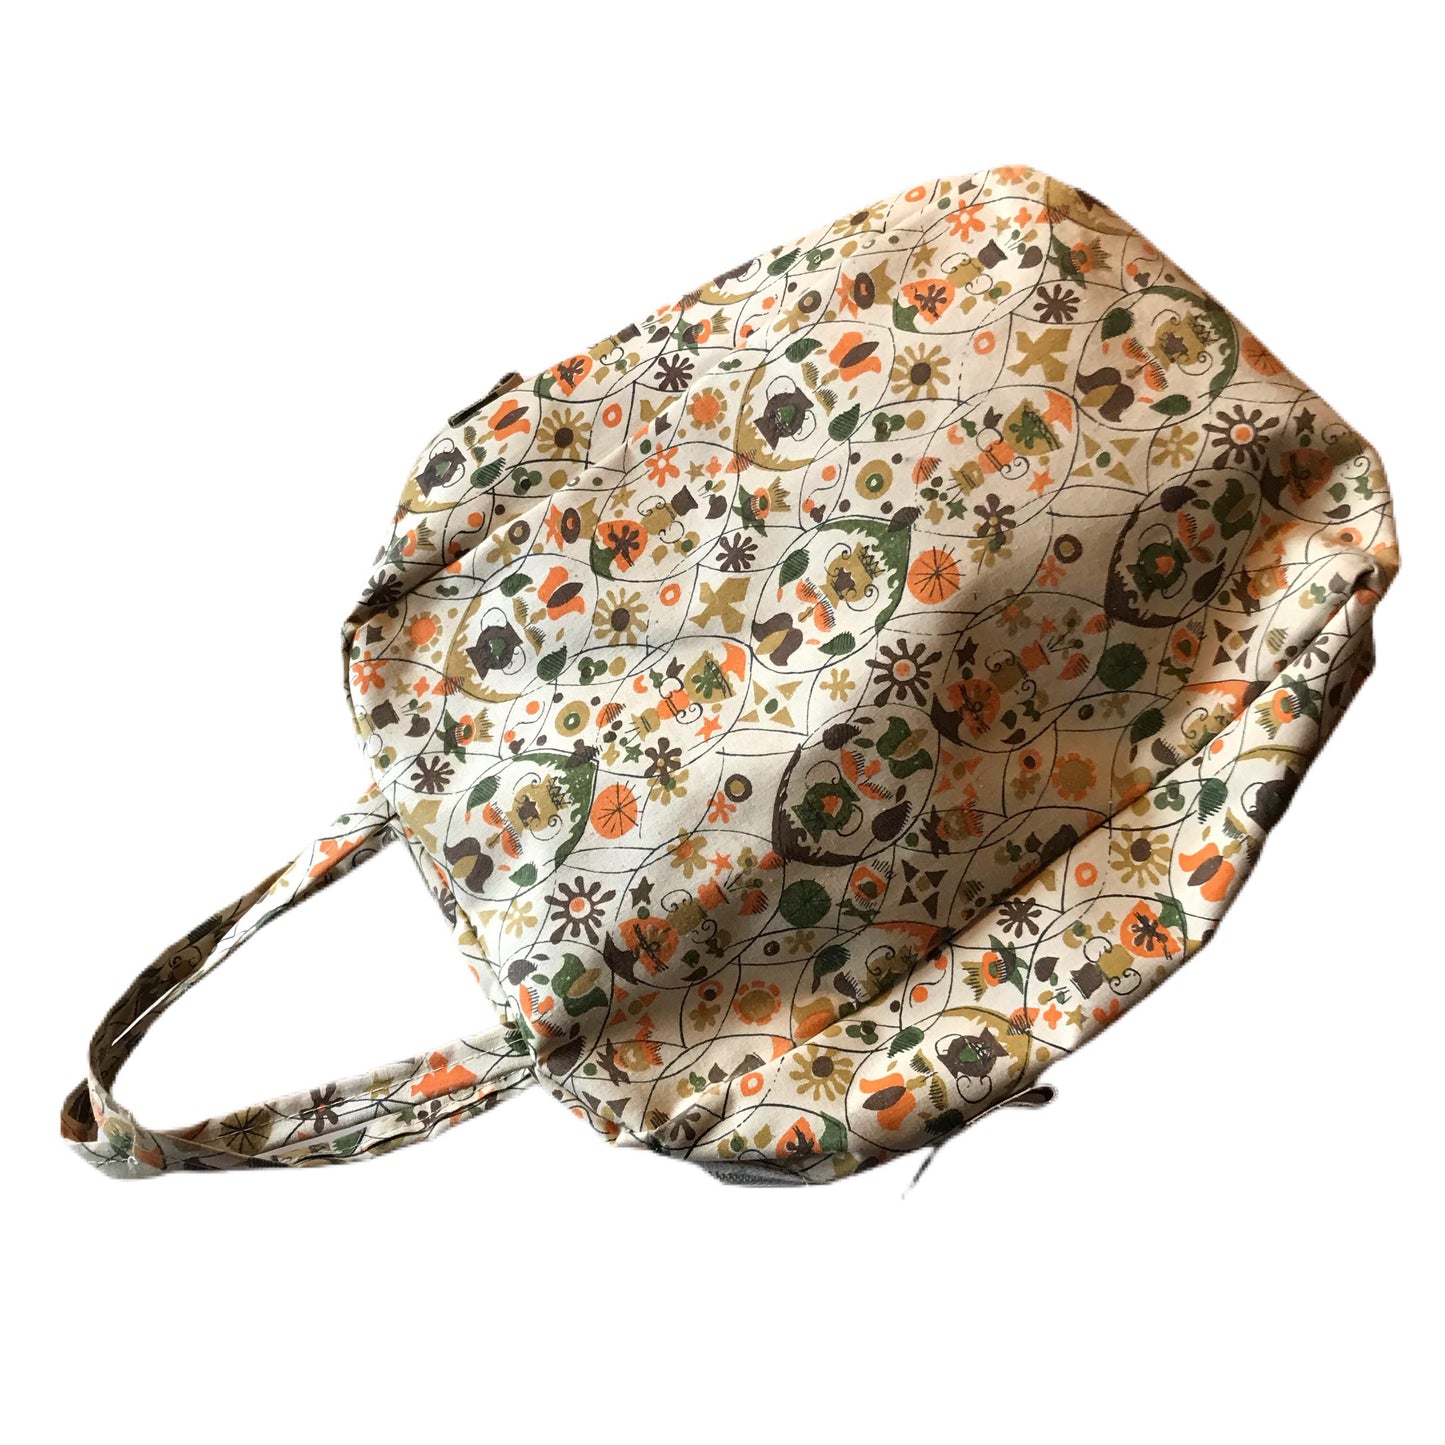 Colonial Inspired Novelty Print Canvas Shoe Bag circa 1960s